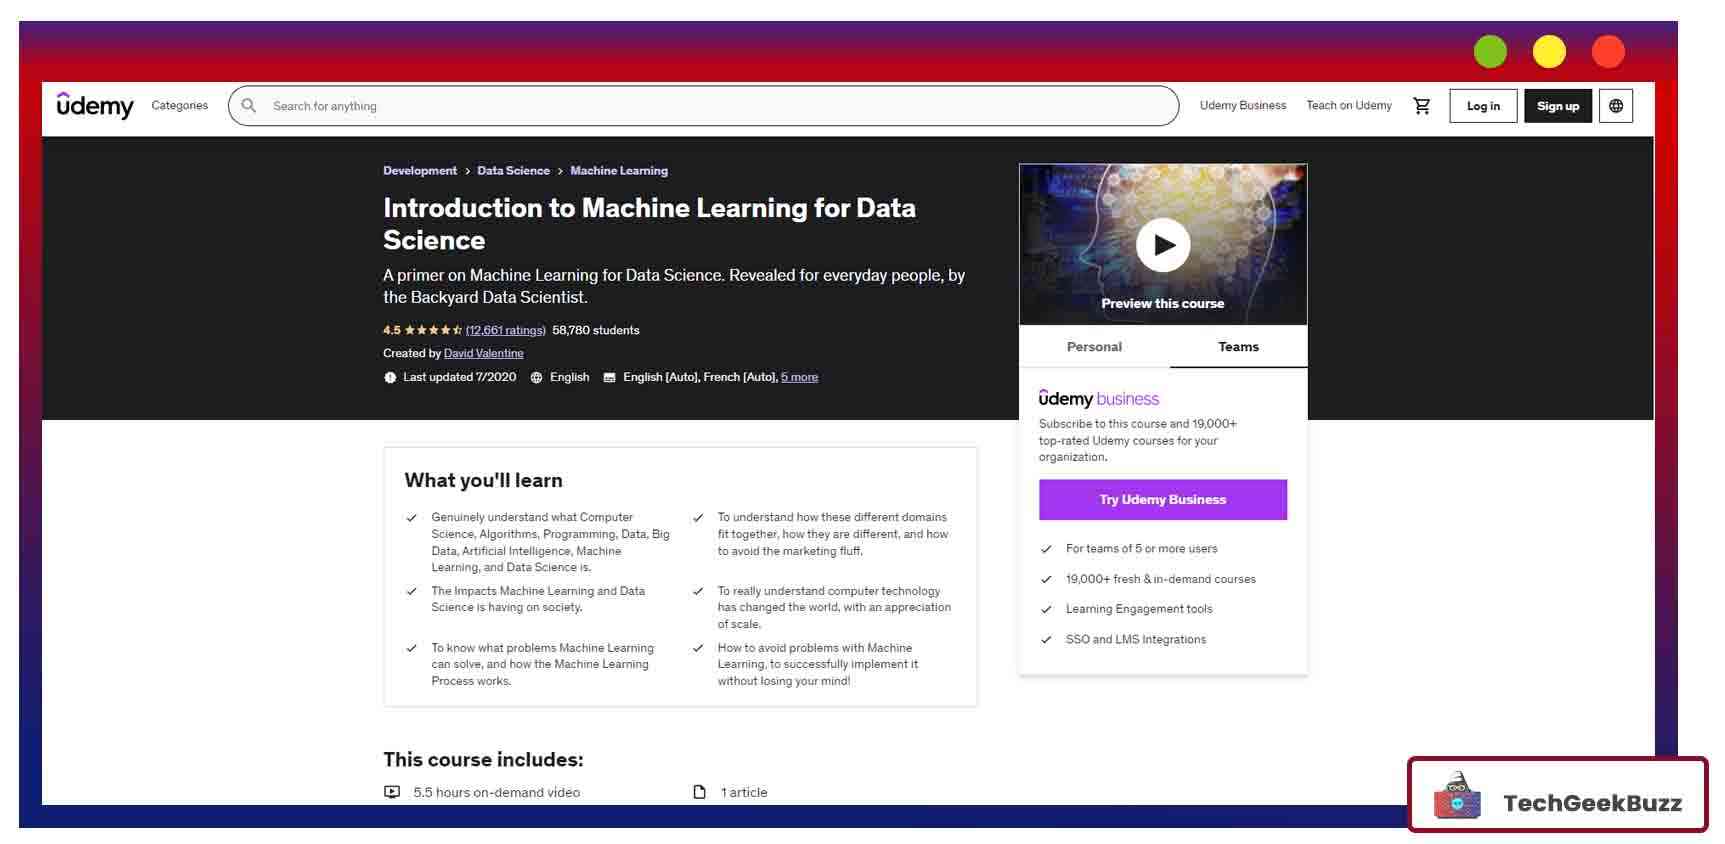 Introduction to Machine Learning for Data Science